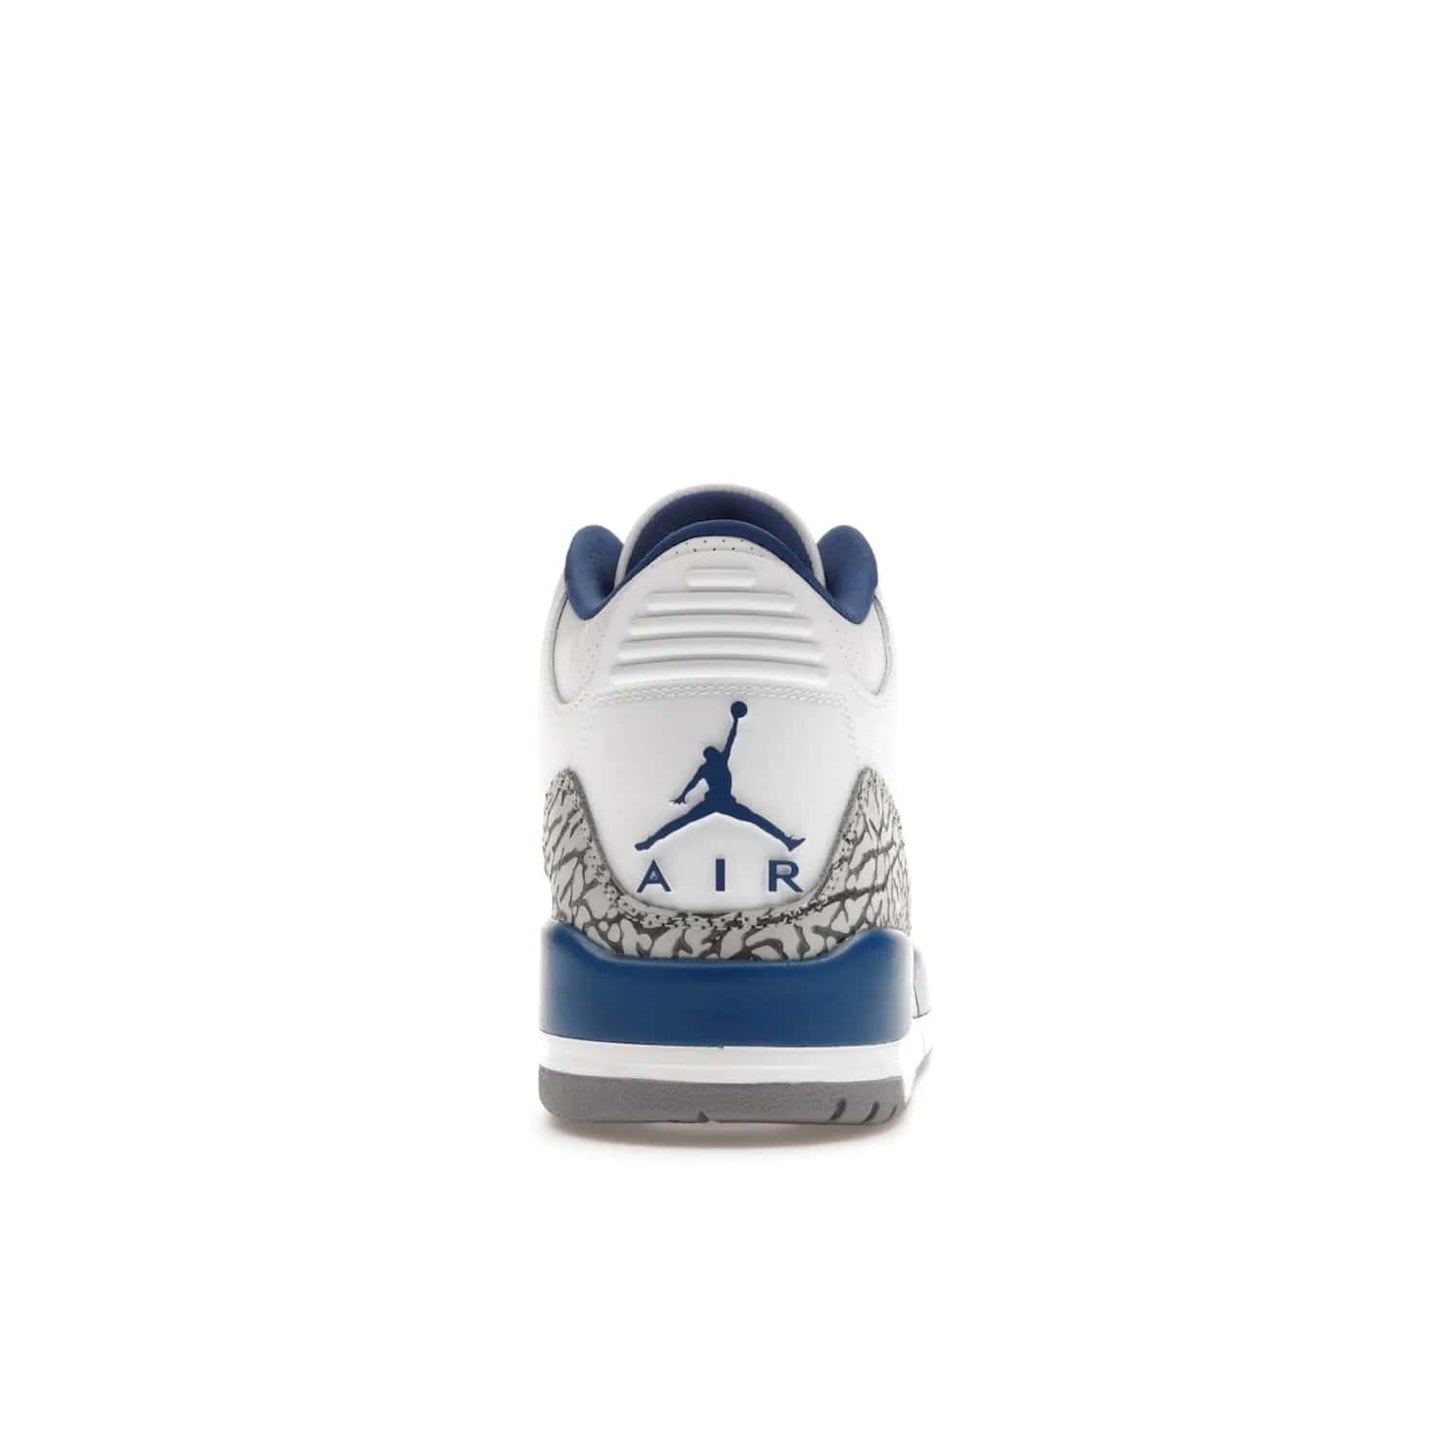 Jordan 3 Retro Wizards - Image 28 - Only at www.BallersClubKickz.com - ##
Special tribute sneaker from Jordan Brand to Michael Jordan's time with the Washington Wizards. Iconic white upper, orange Jumpman logo, blue accents, metallic copper details, and cement grey outsole. Buy the Air Jordan 3 Retro Wizards April 29, 2023.